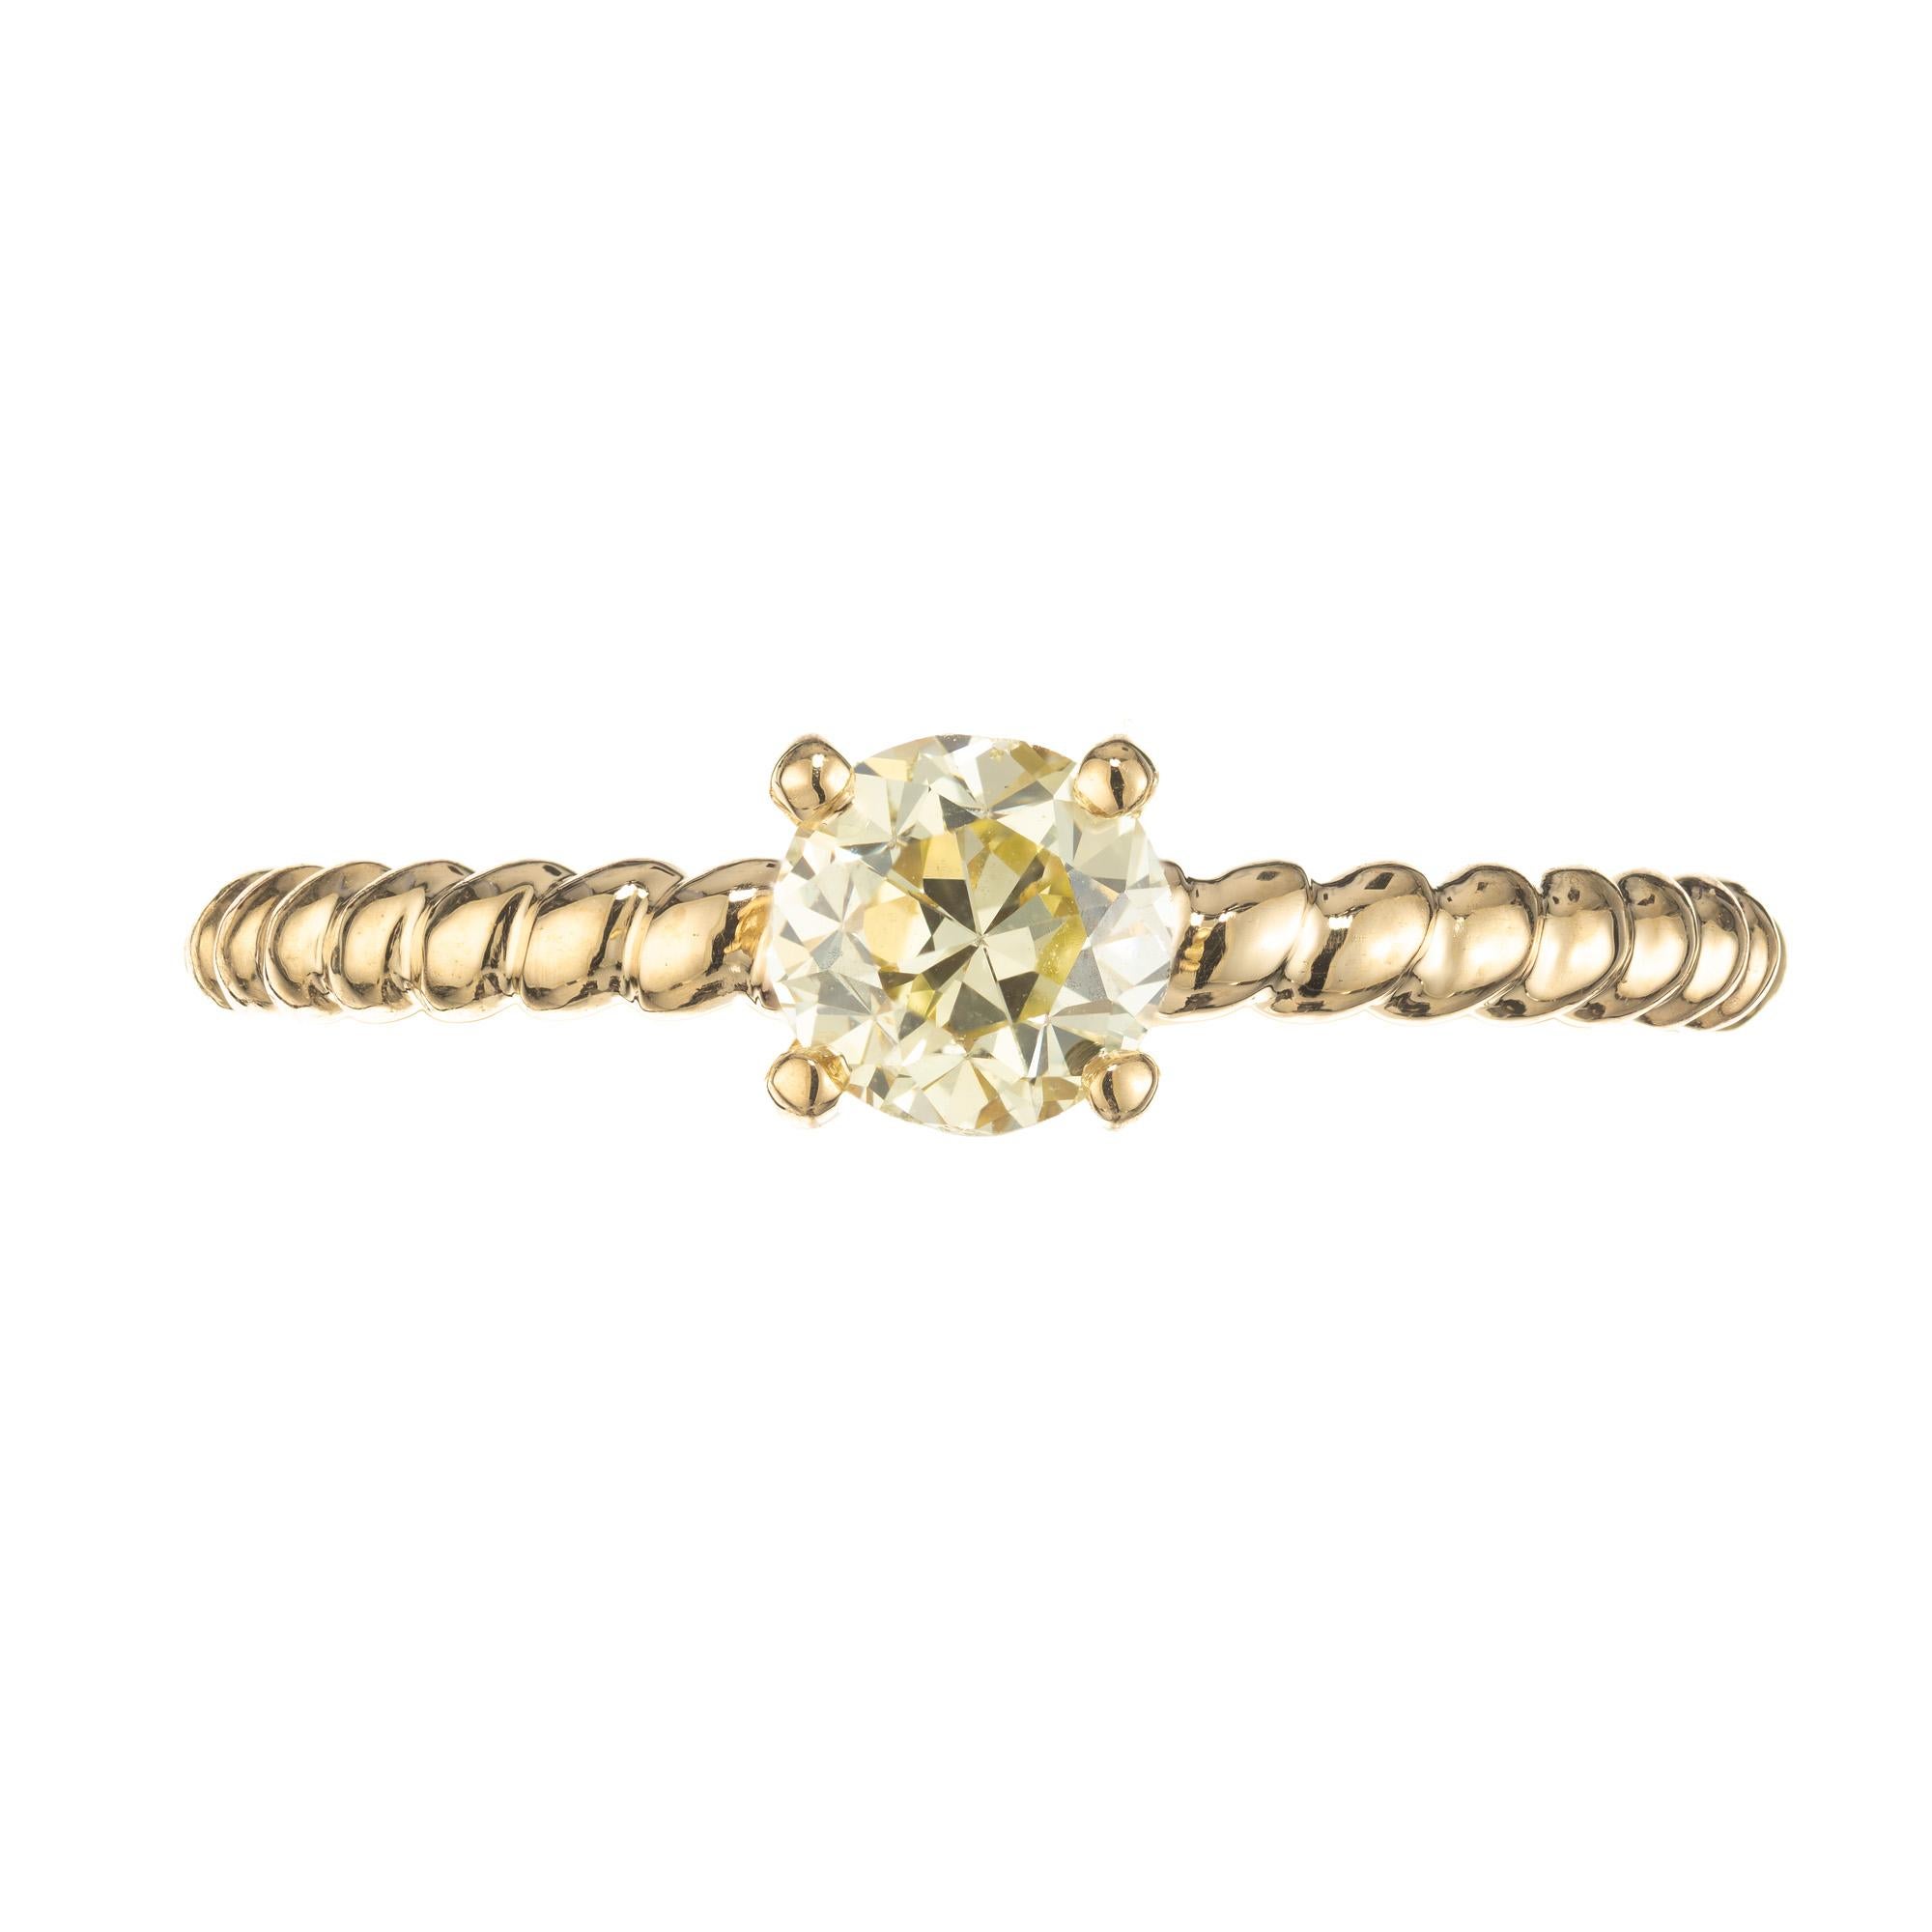 Simple and elegant light yellow diamond ring. The ring starts with a .56ct light yellow round brilliant cut diamond. Set in a four prong solitaire setting. The 18k yellow gold band has a rope design three quarters way around to allow for sizing. The